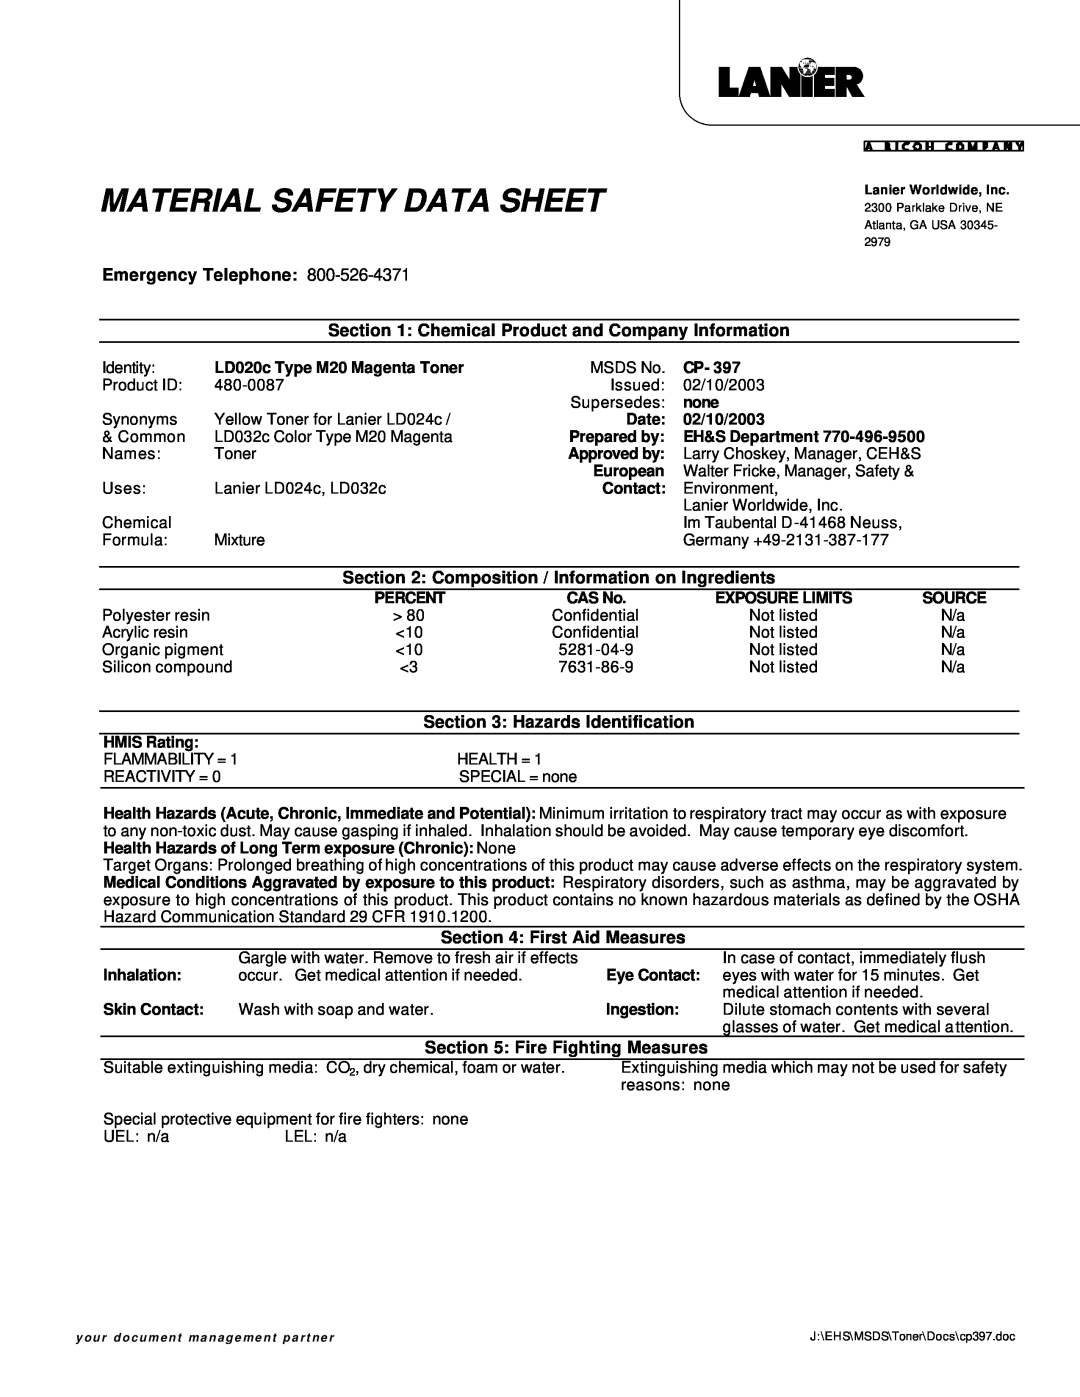 Lanier LD020C manual Material Safety Data Sheet, Emergency Telephone, Hazards Identification, First Aid Measures 